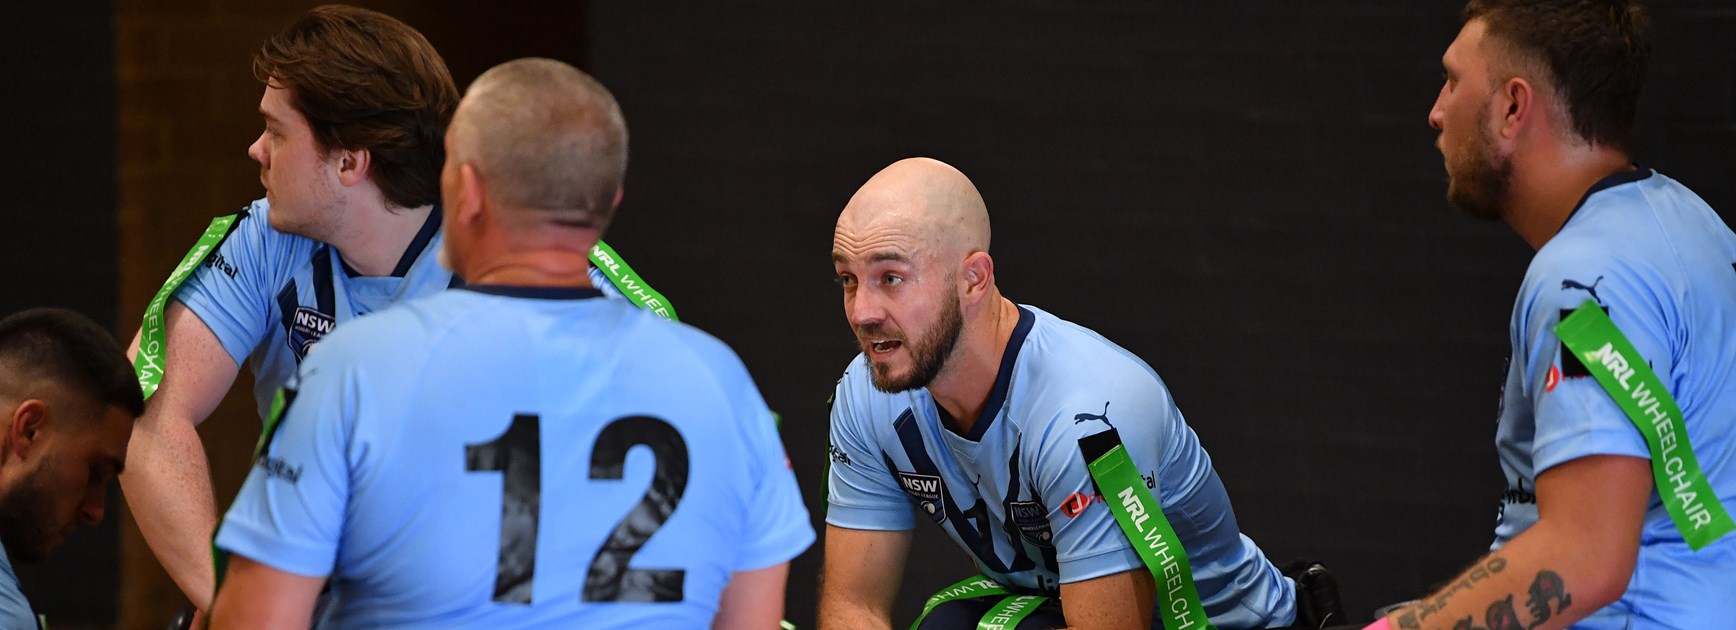 Origin stars sign up for NSW Wheelchair Rugby League season